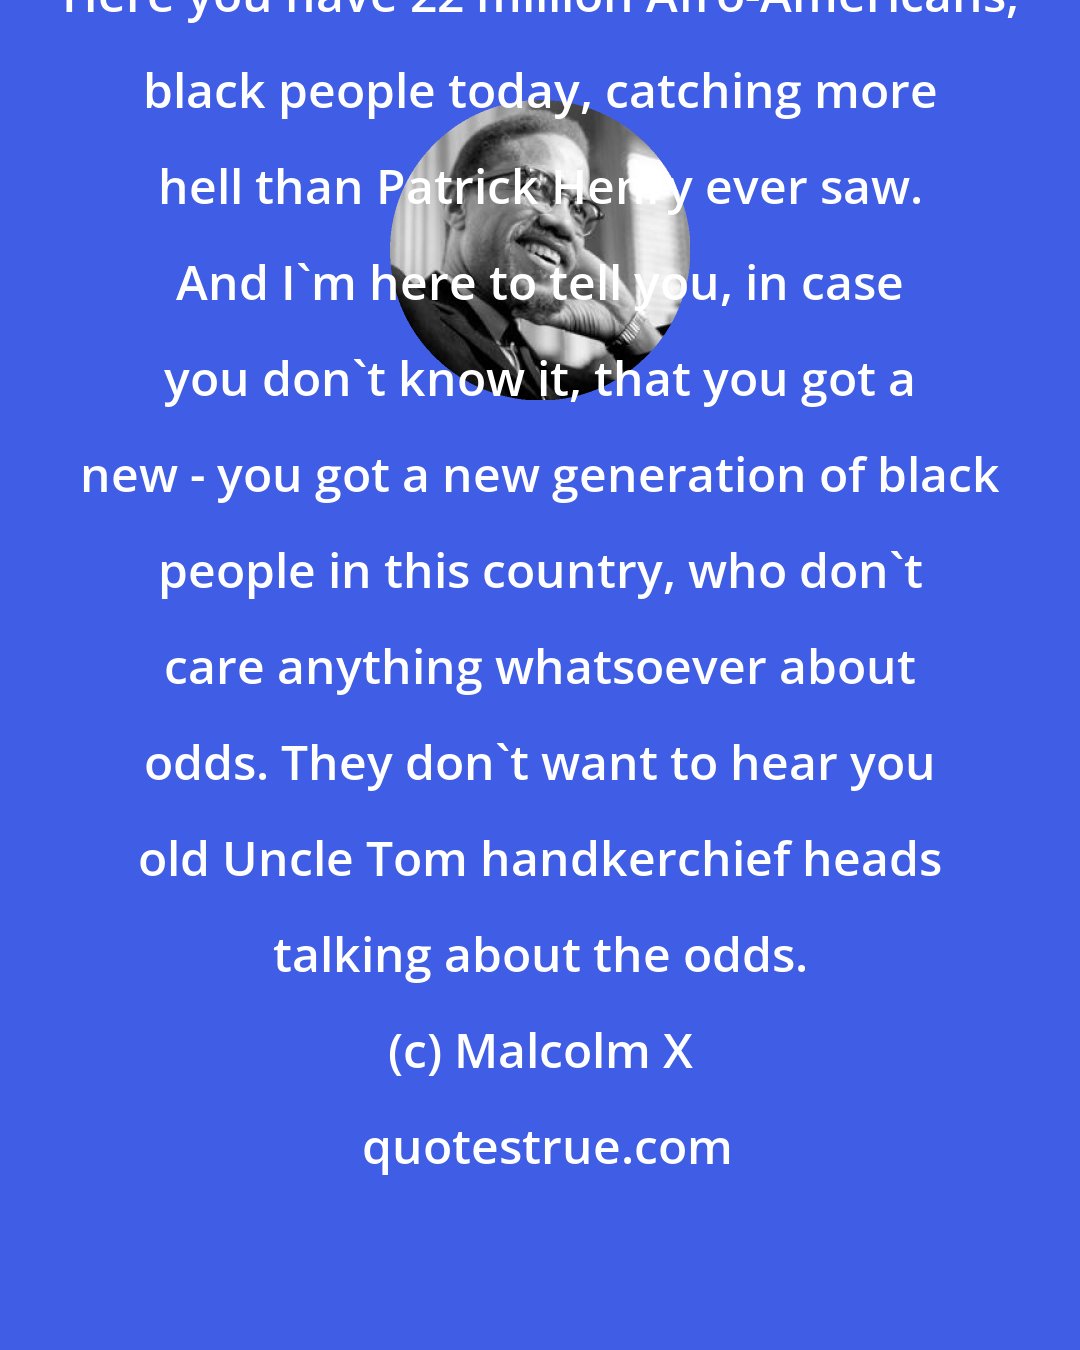 Malcolm X: Here you have 22 million Afro-Americans, black people today, catching more hell than Patrick Henry ever saw. And I'm here to tell you, in case you don't know it, that you got a new - you got a new generation of black people in this country, who don't care anything whatsoever about odds. They don't want to hear you old Uncle Tom handkerchief heads talking about the odds.